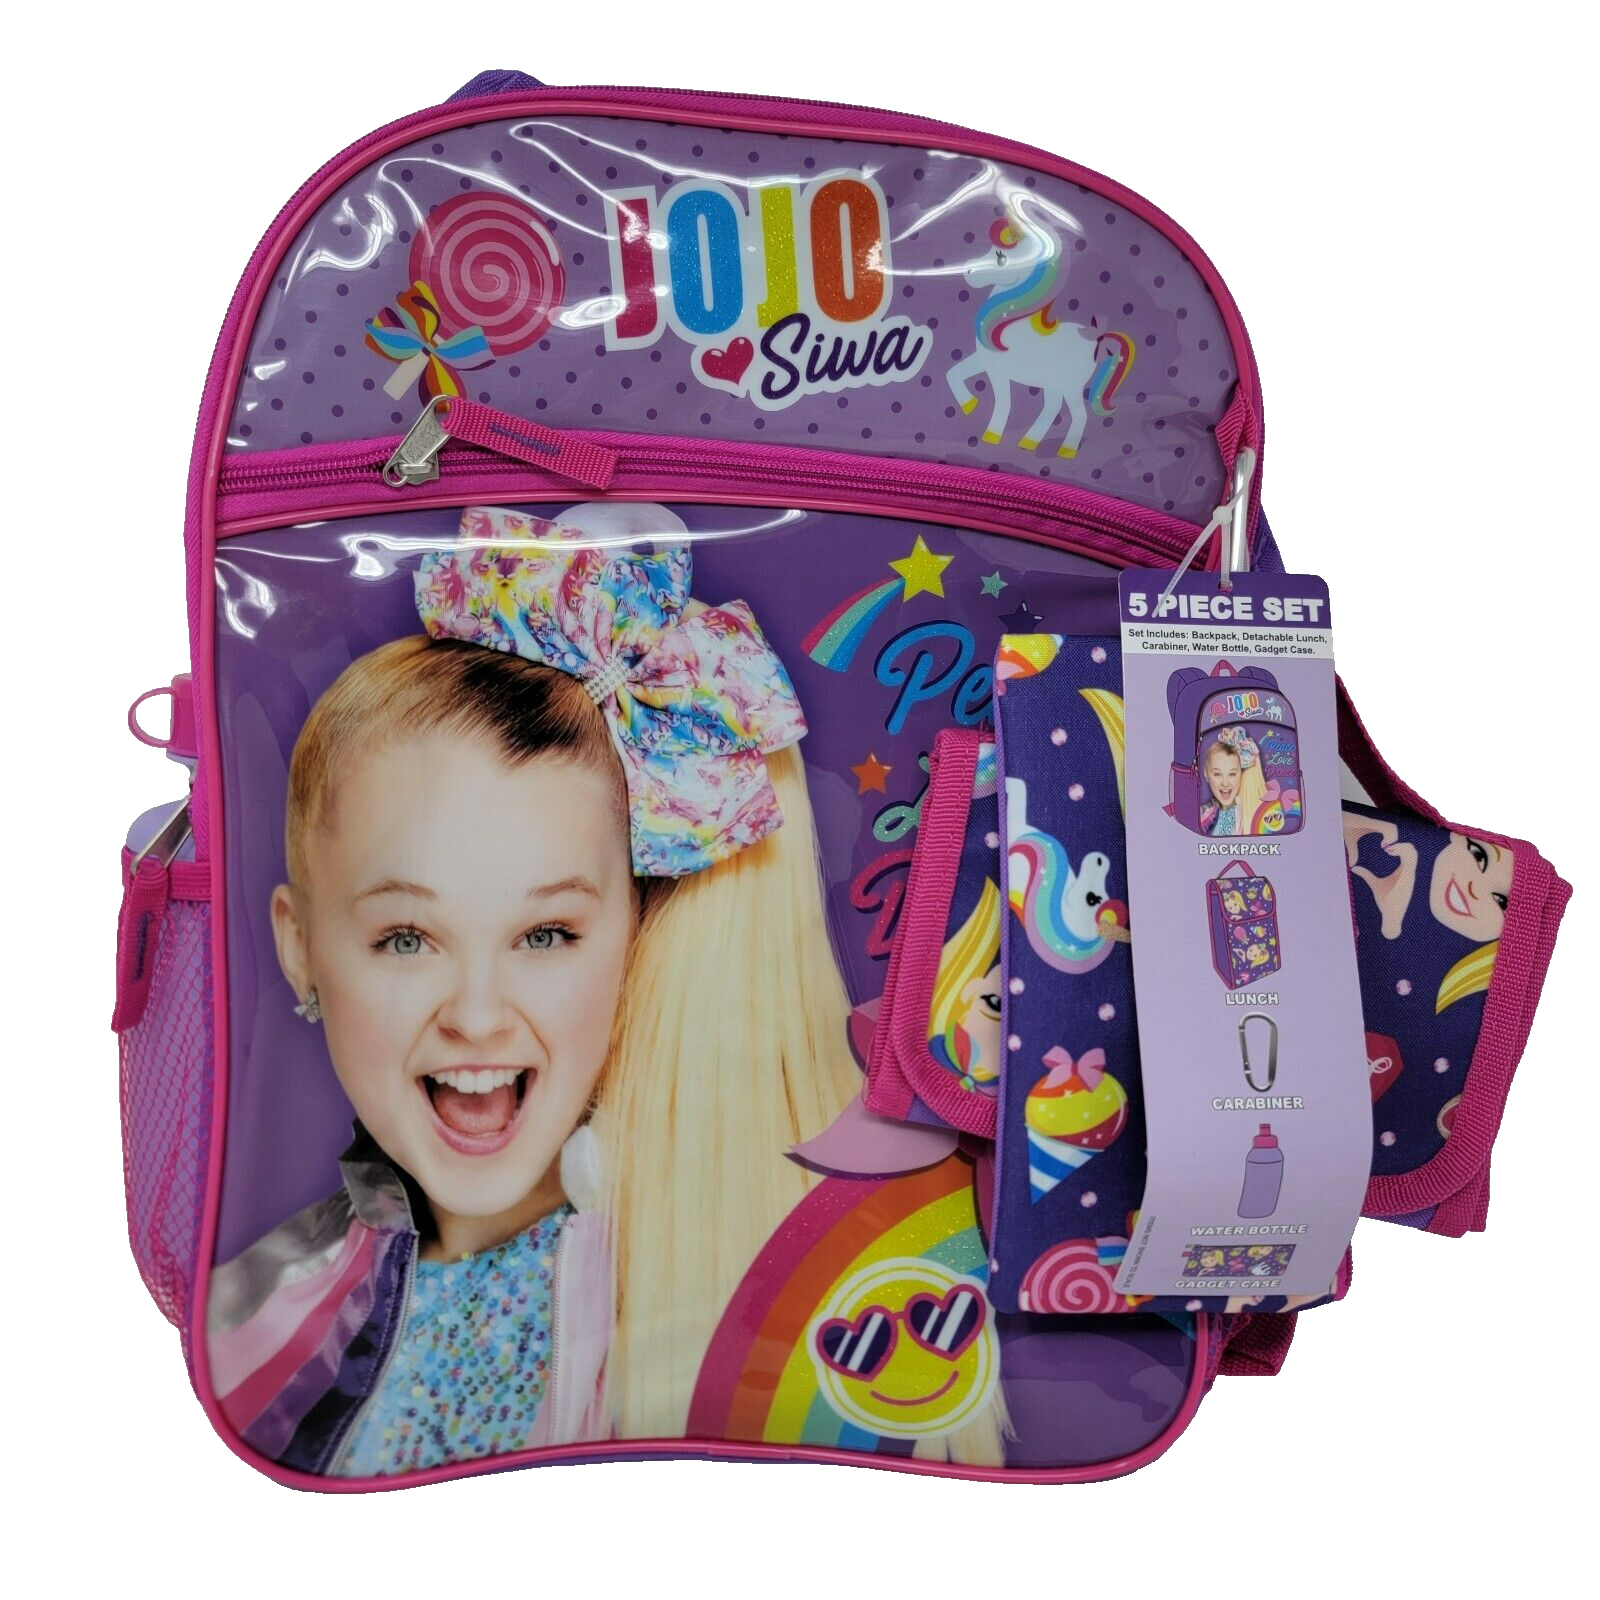 Primary image for JoJo Siwa Peace Love Dance Backpack 16" - 5 Piece Set Lunch Box Water Bottle